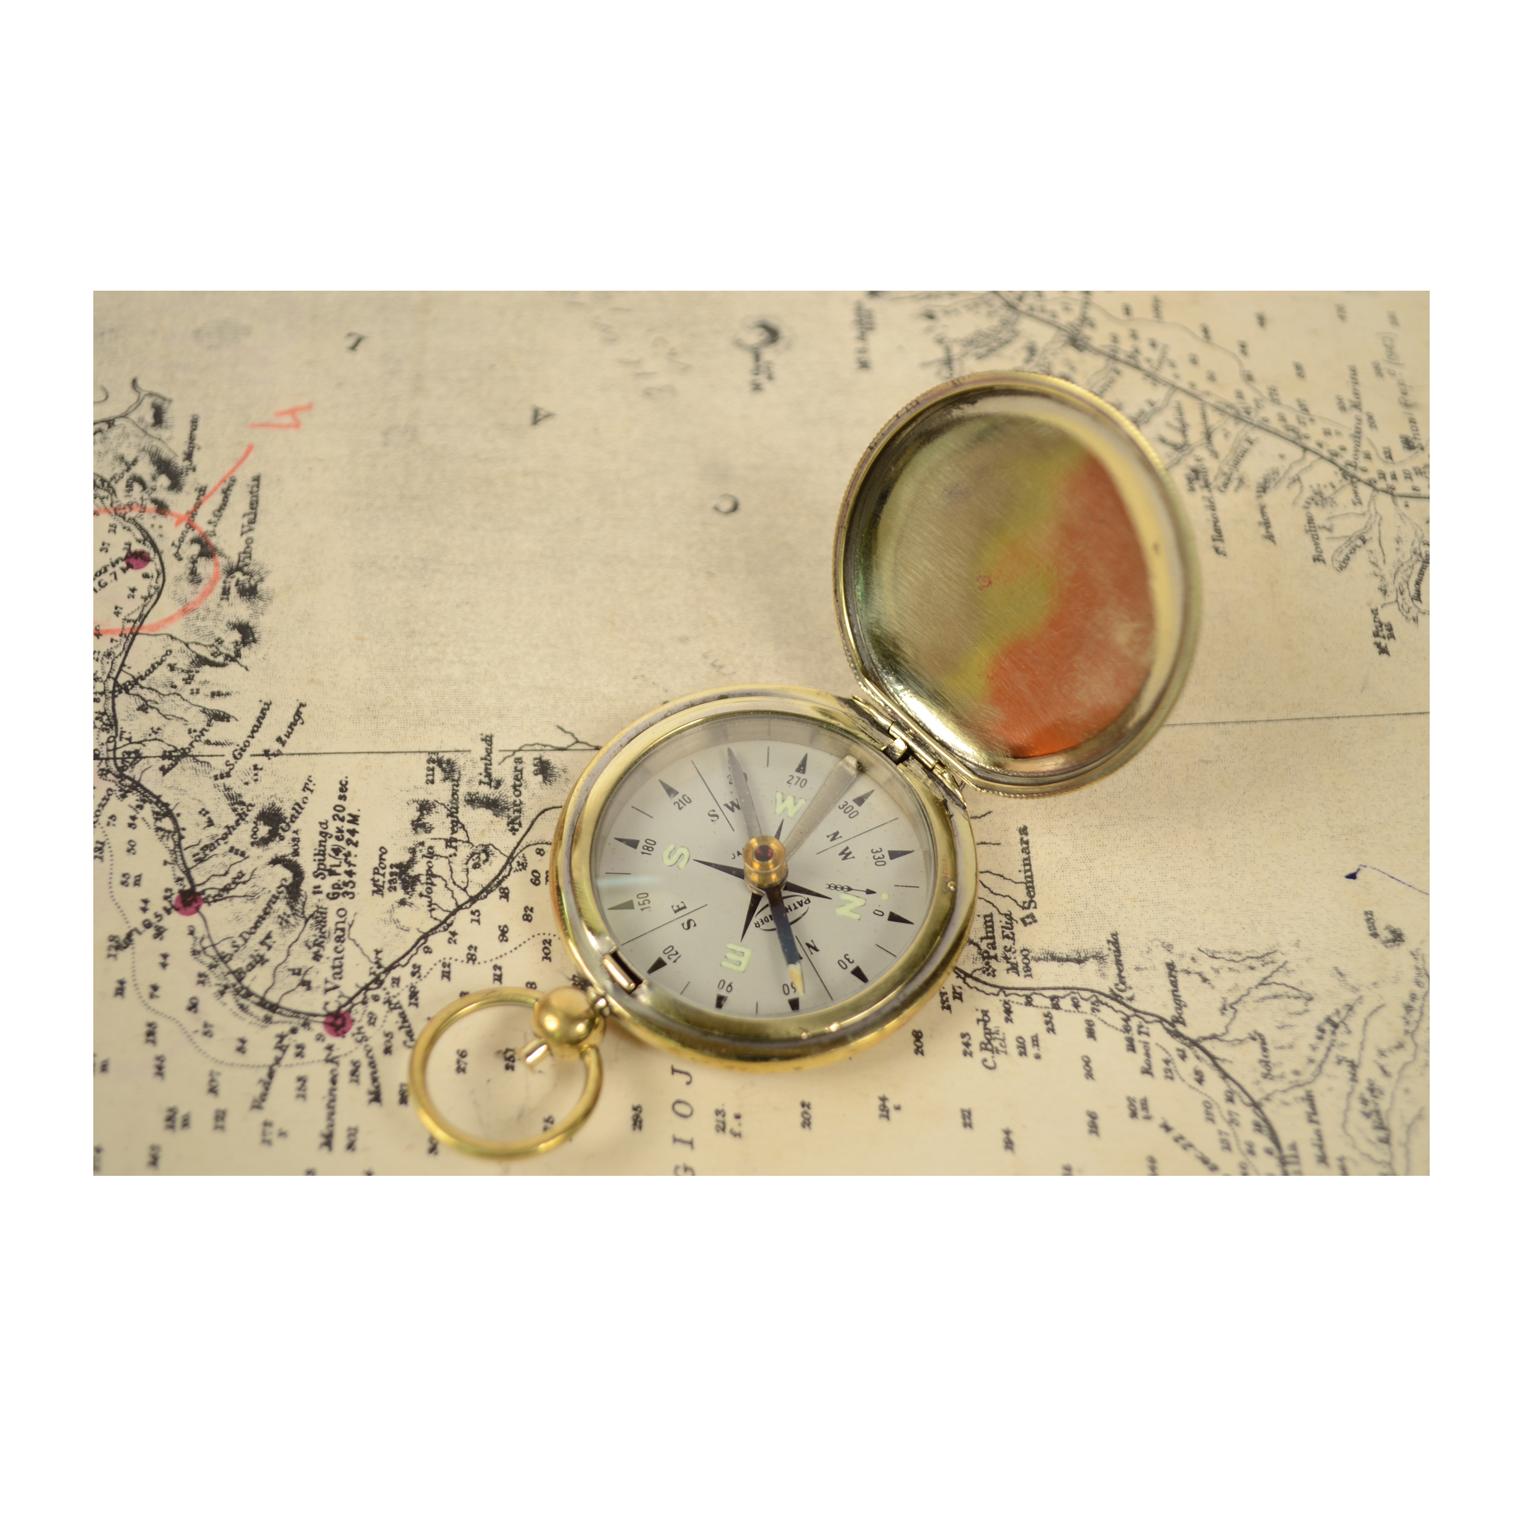 Pocket compass signed by Pathfinder Japan, made of brass with the shape of a pocket watch. The compass is equipped with a lid with snap closure and a release button inside the ring. Very good working condition. Measures: Diameter 4.5 cm thickness